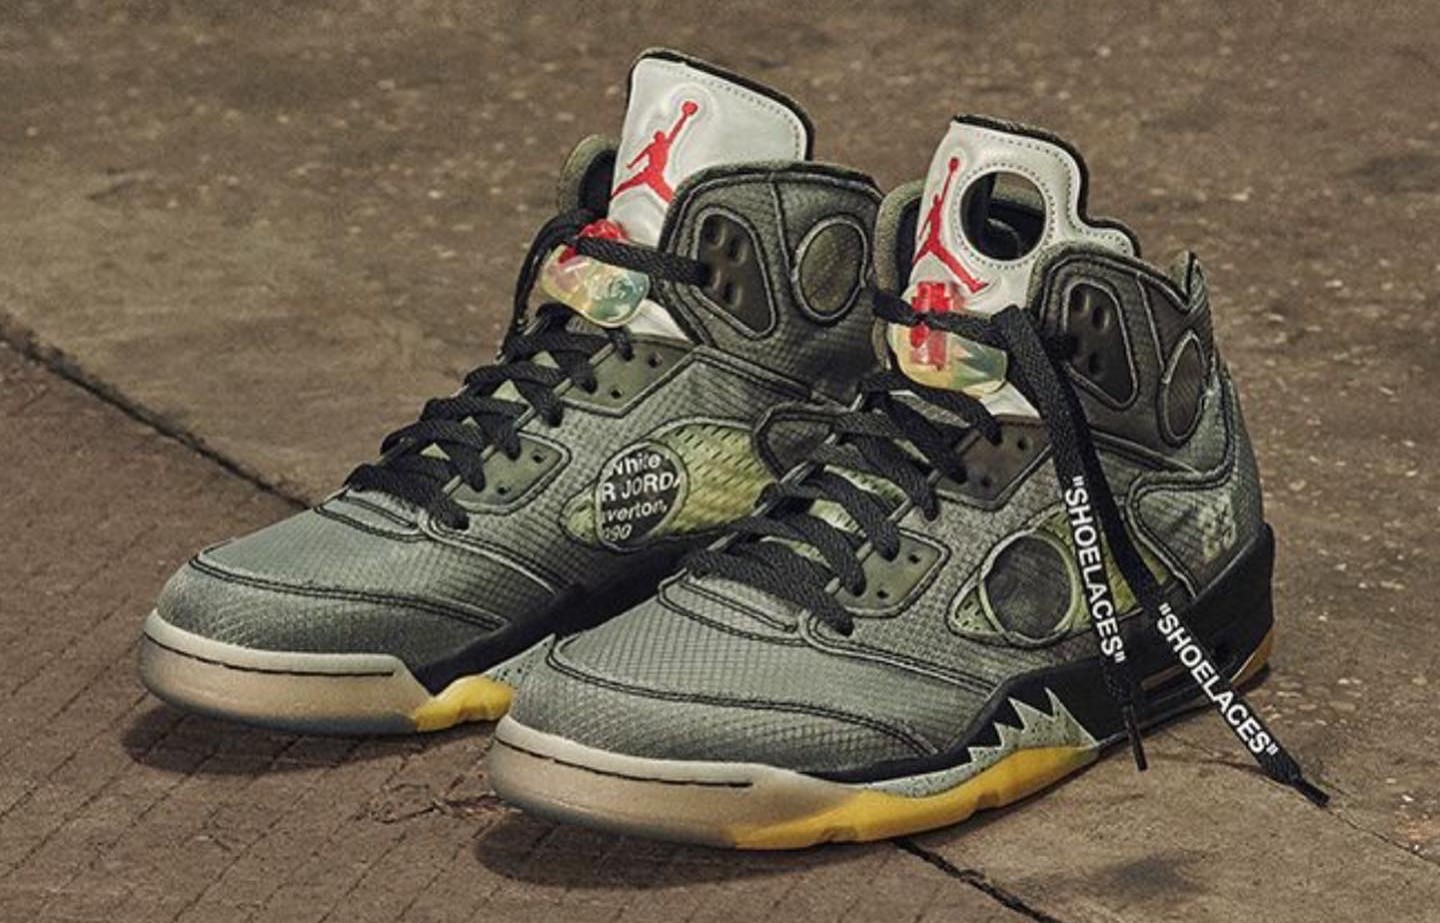 The Off-White x Air Jordan V Isn't Just a Hyped Sneaker Collab, It's a  History Lesson